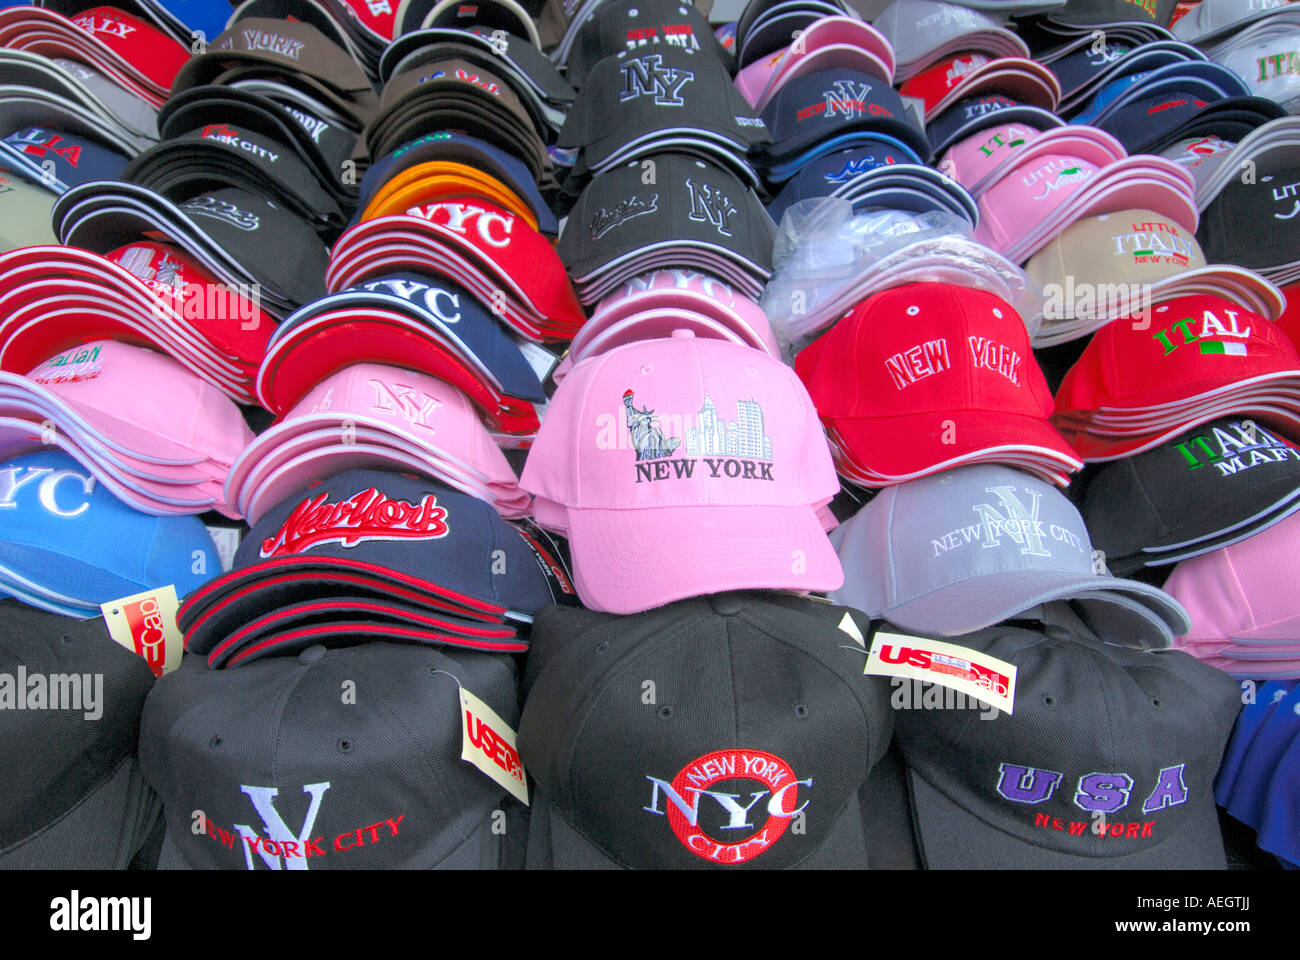 New York baseball caps on sale at street stand in Little Italy Stock Photo  - Alamy